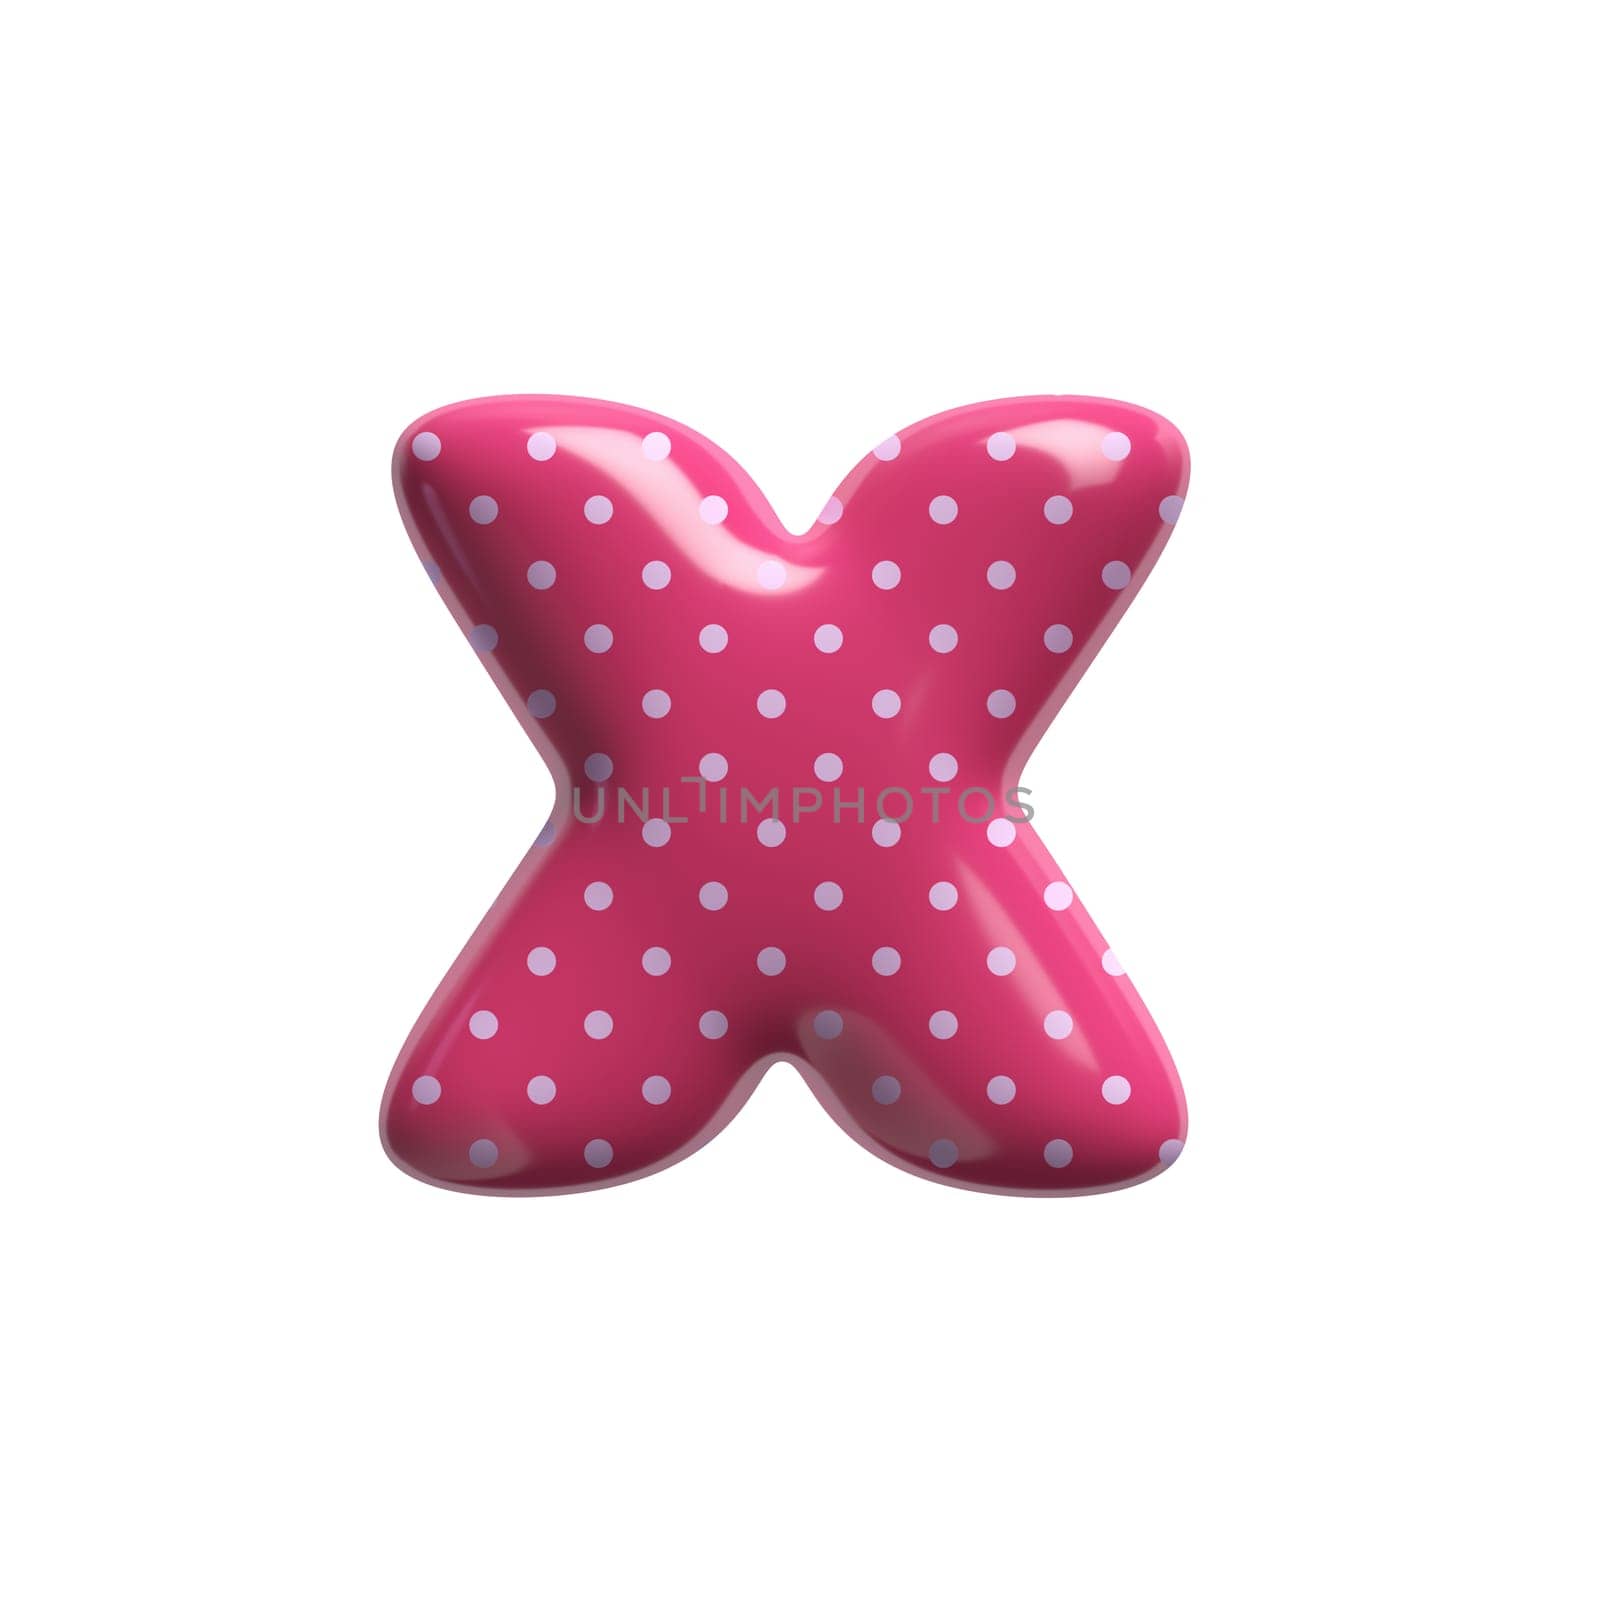 Polka dot letter X - Small 3d pink retro font - Suitable for Fashion, retro design or decoration related subjects by chrisroll